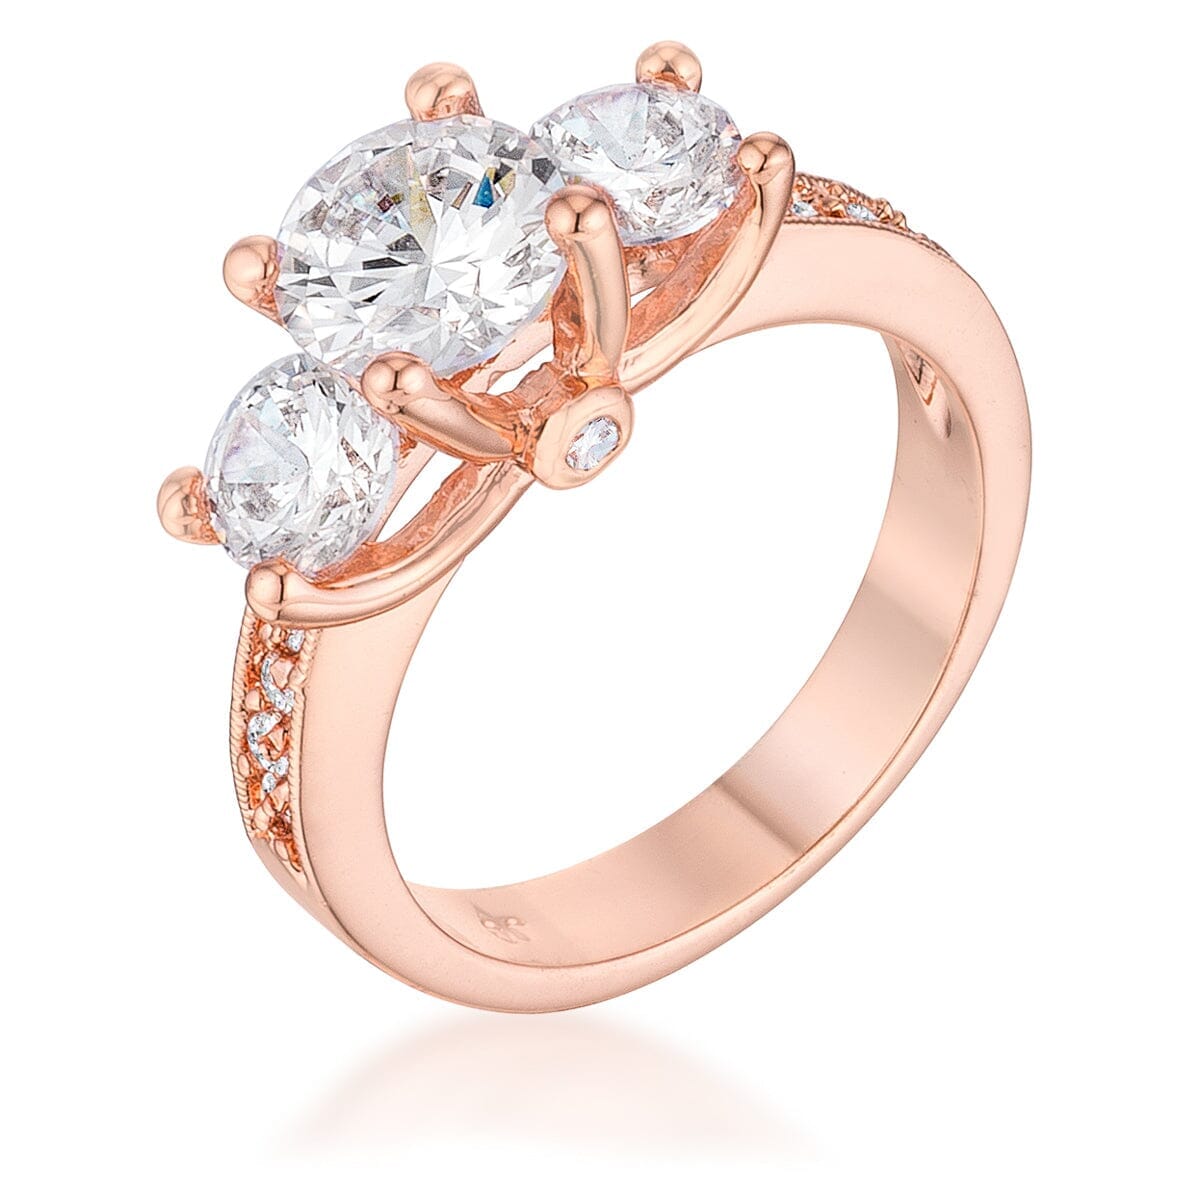 Dazzling Three Stone Engagement Ring with Cubic Zirconia Rings Das Juwel 